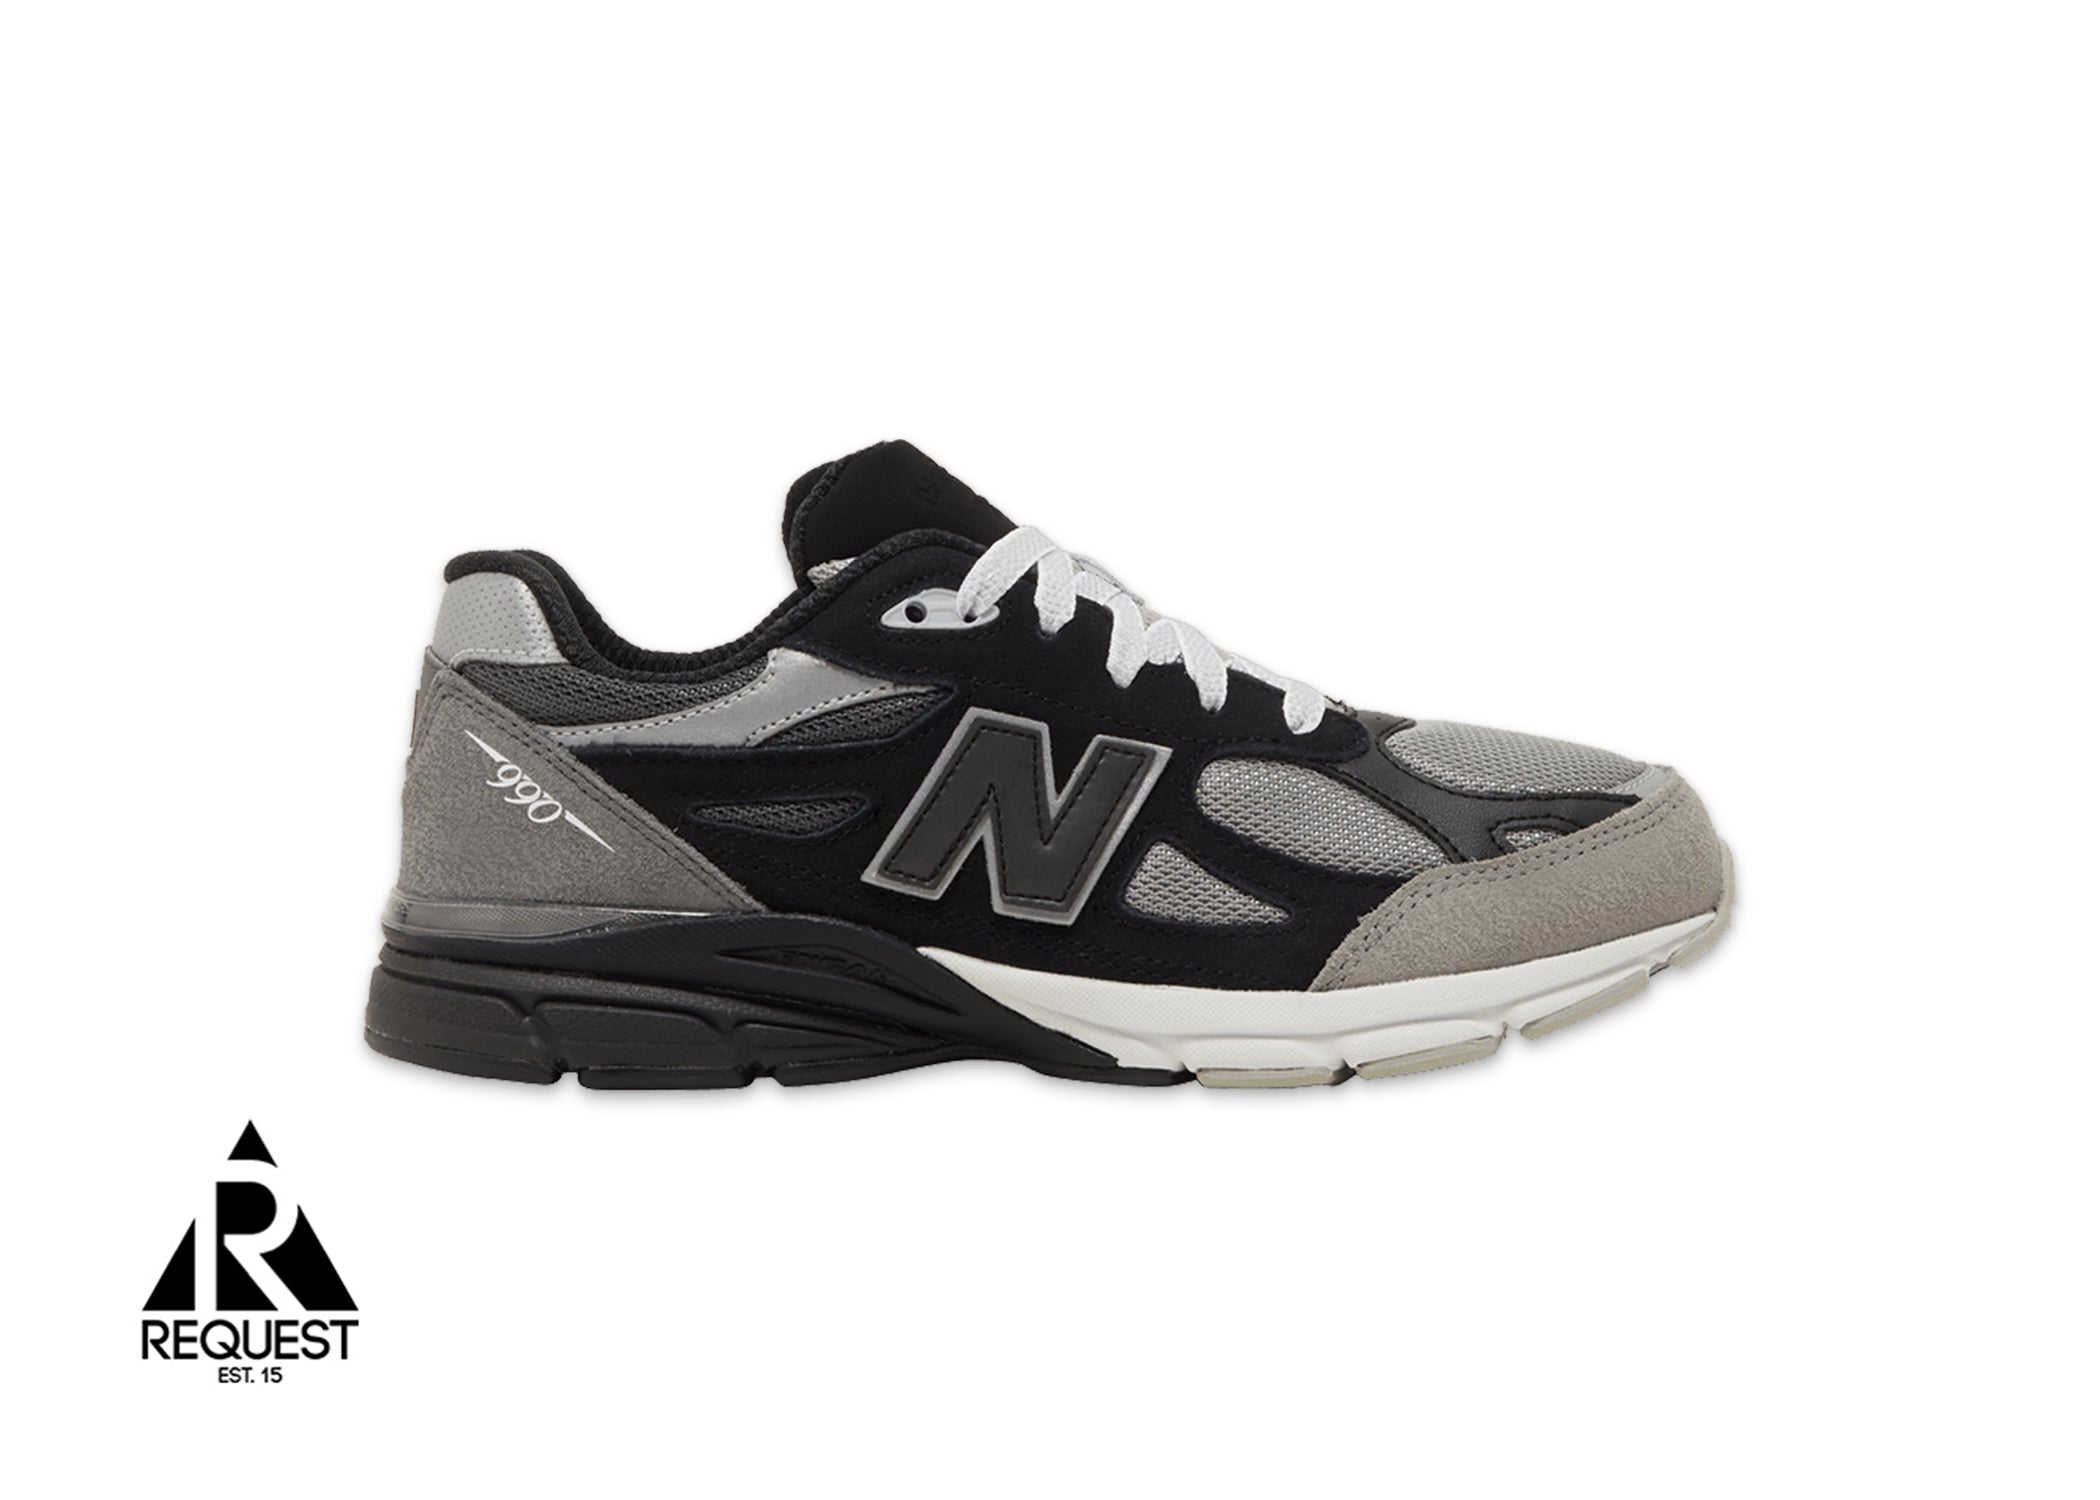 New Balance 990v3 "MiUSA DTLR GR3YSCALE" (GS)